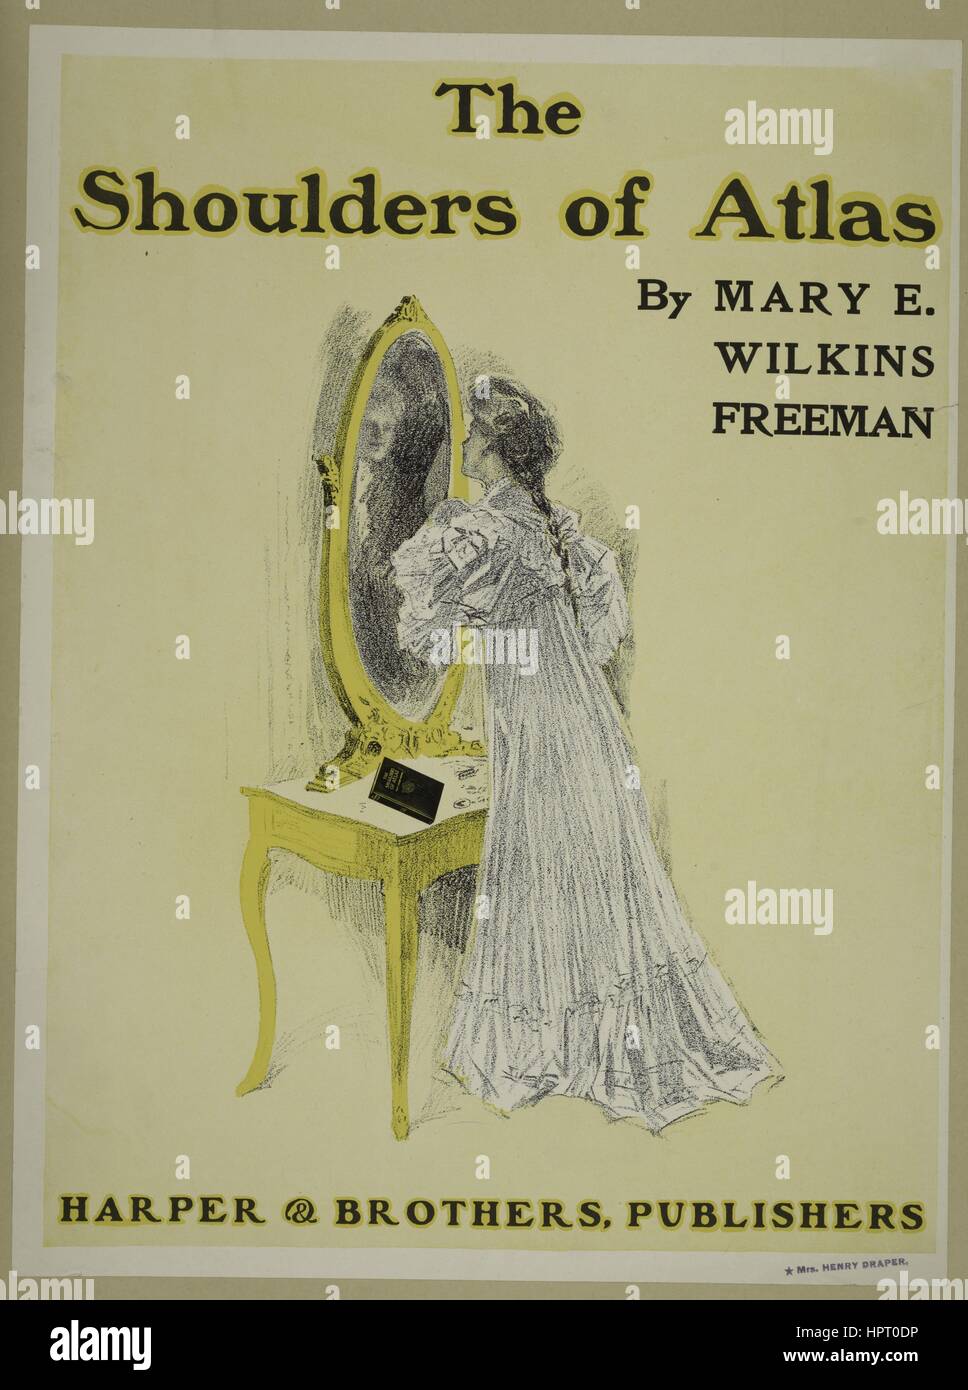 Poster advertising the novel 'The Shoulders of Atlas' by Mary E. Wilkins Freeman, 1903. From the New York Public Library. Stock Photo